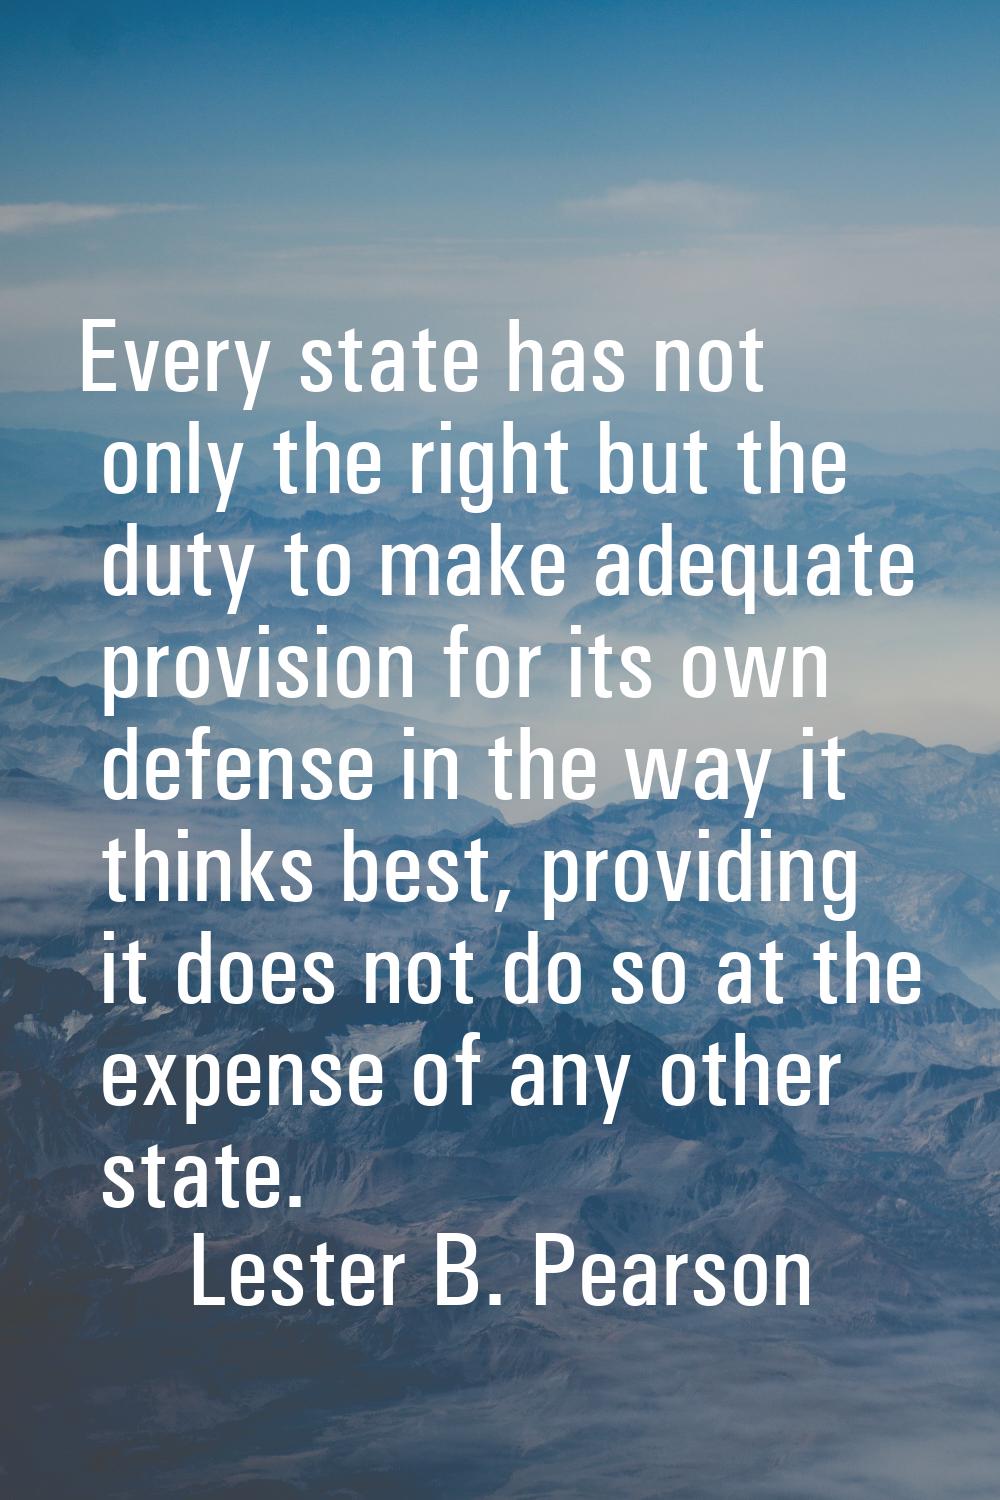 Every state has not only the right but the duty to make adequate provision for its own defense in t